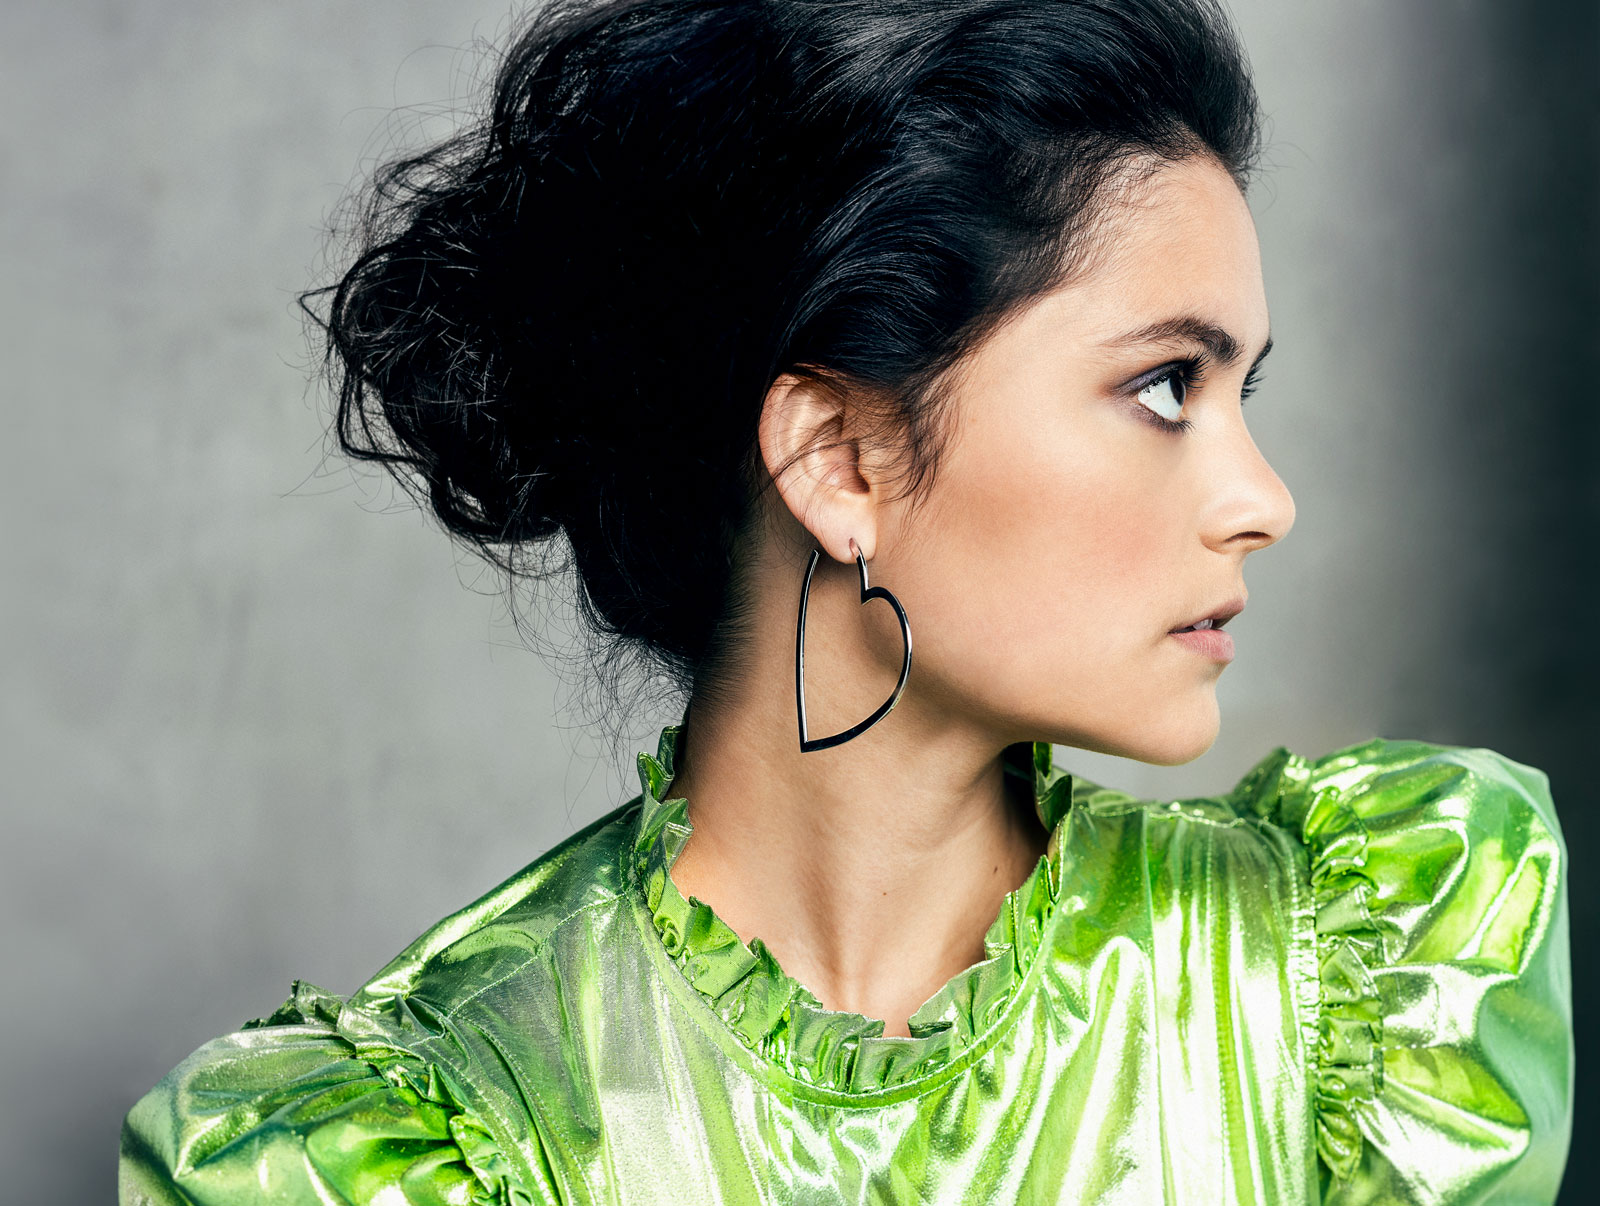 Actress Blu Hunt wearing a bright green shiny blouse, in profile.